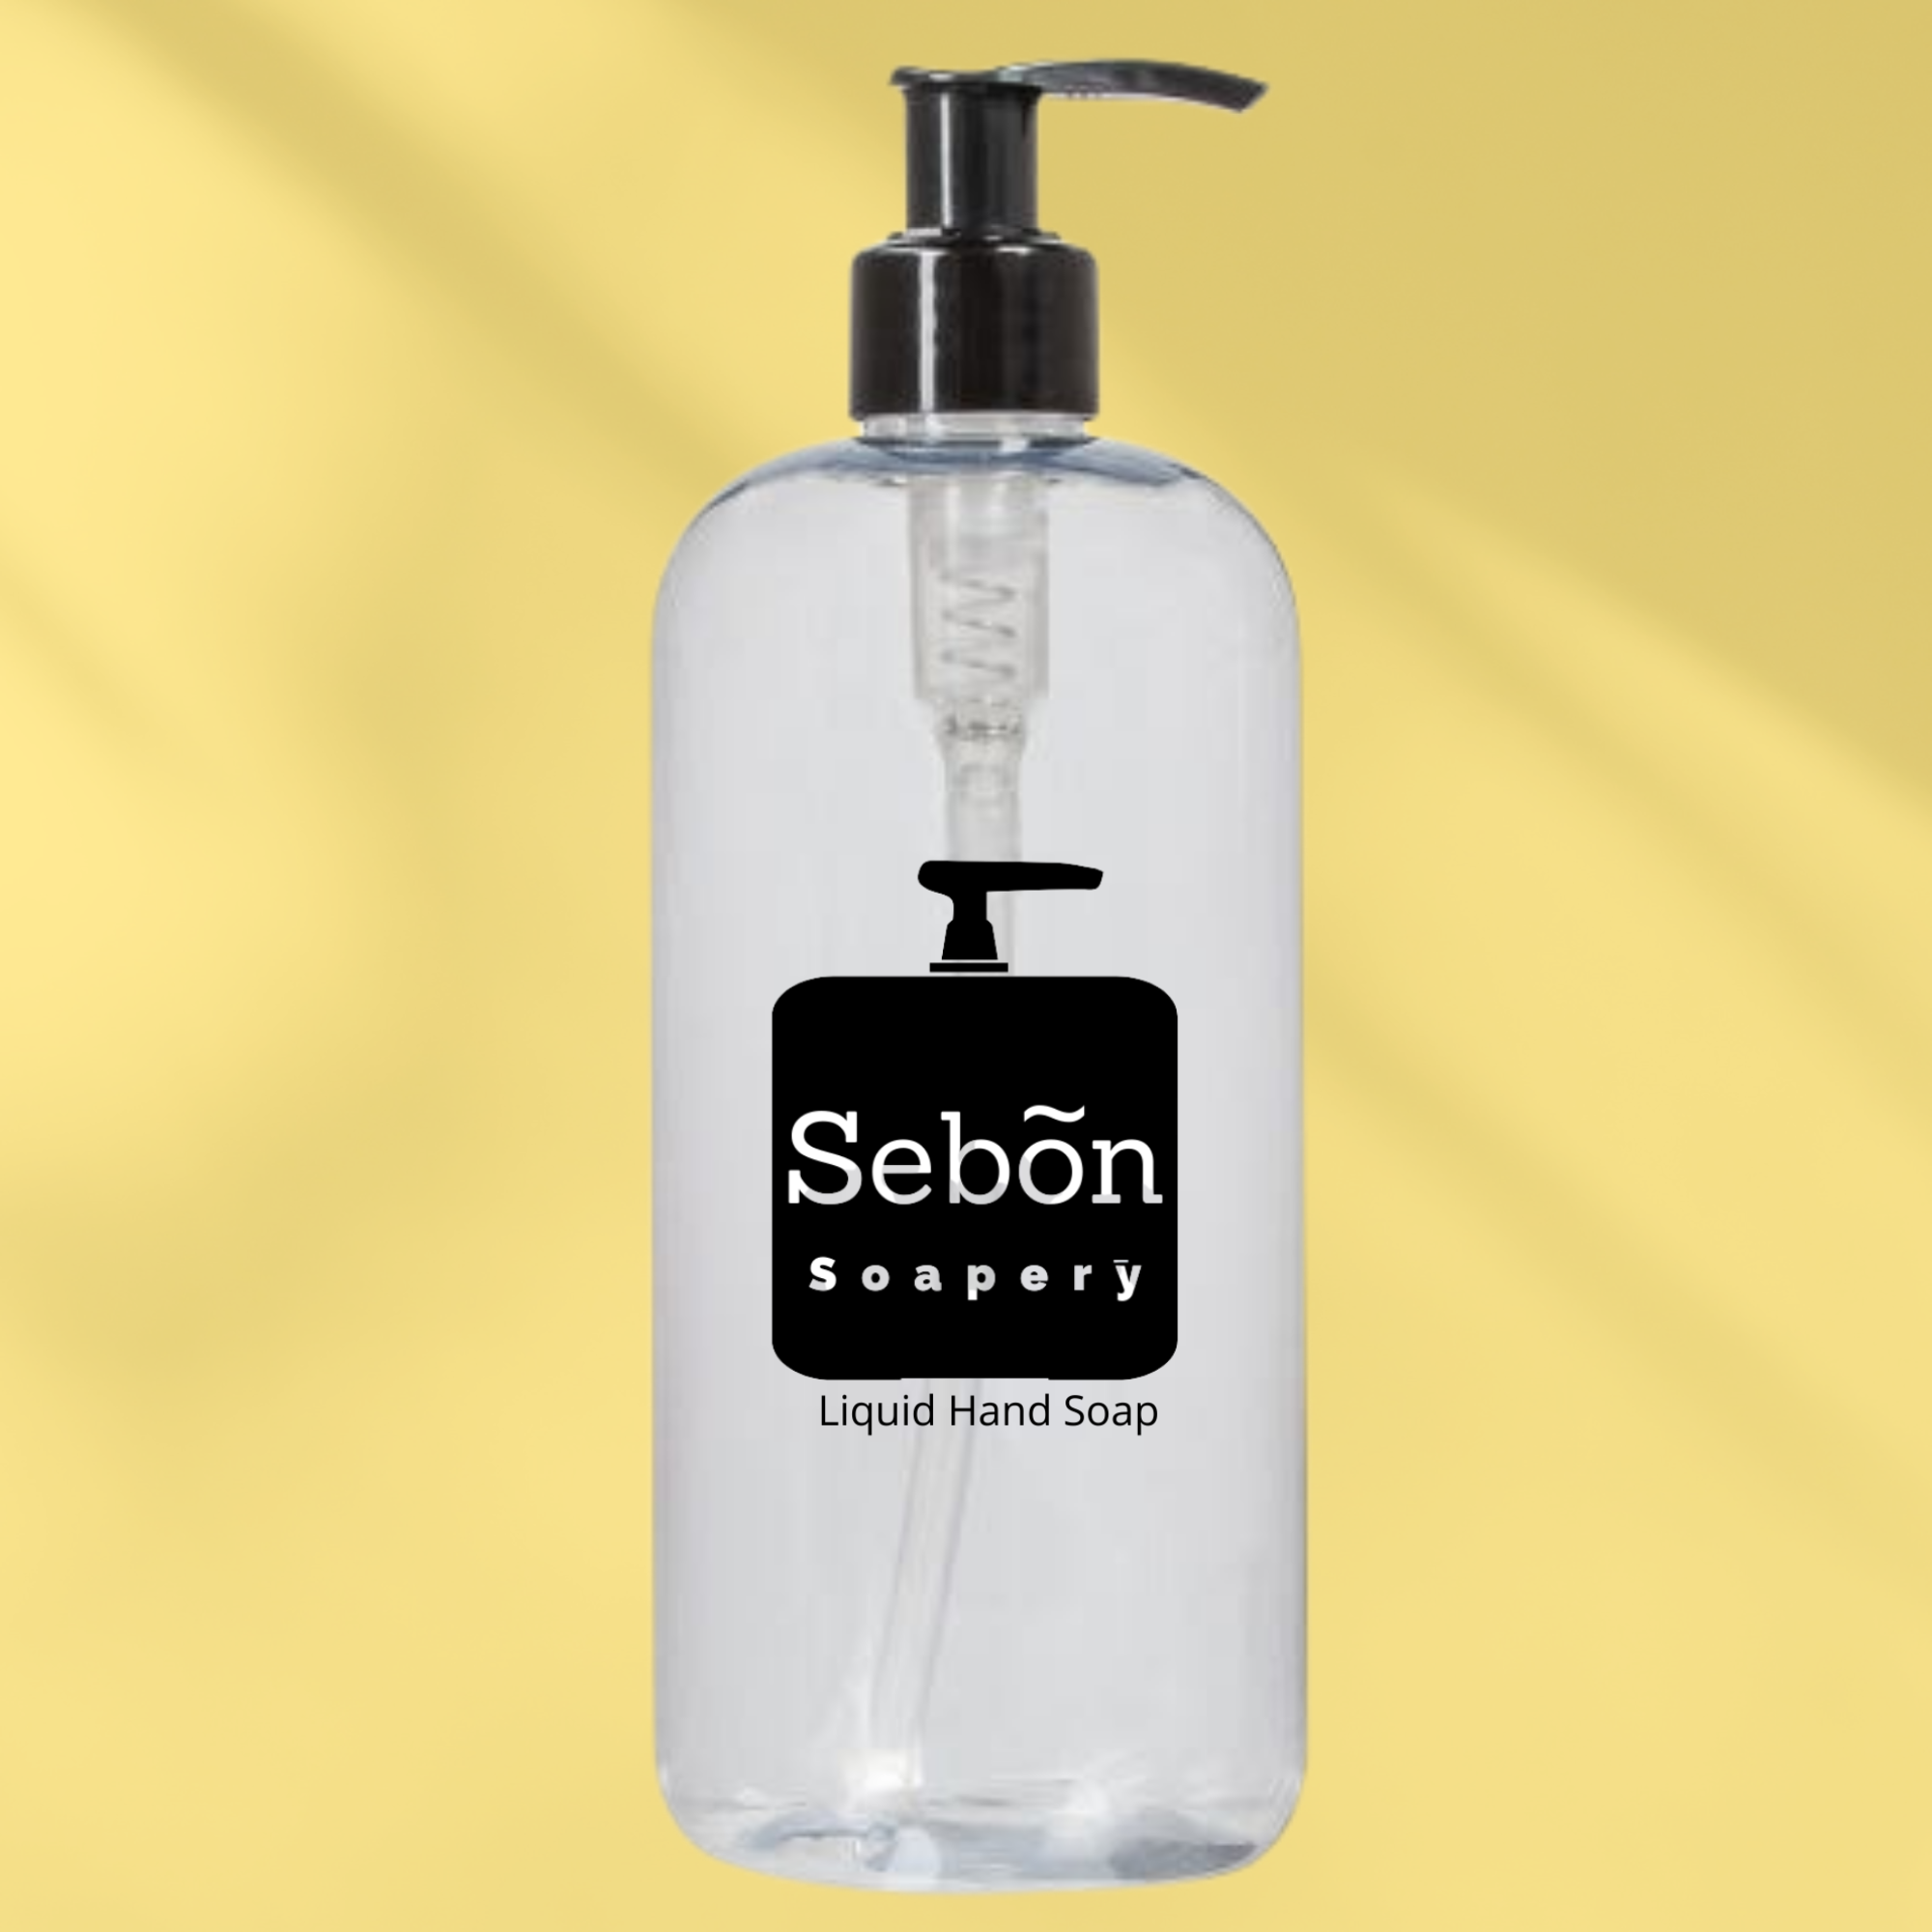 Sebon Cherry Blossom & Sandalwood Scented Liquid Hand Soap with Olive Oil